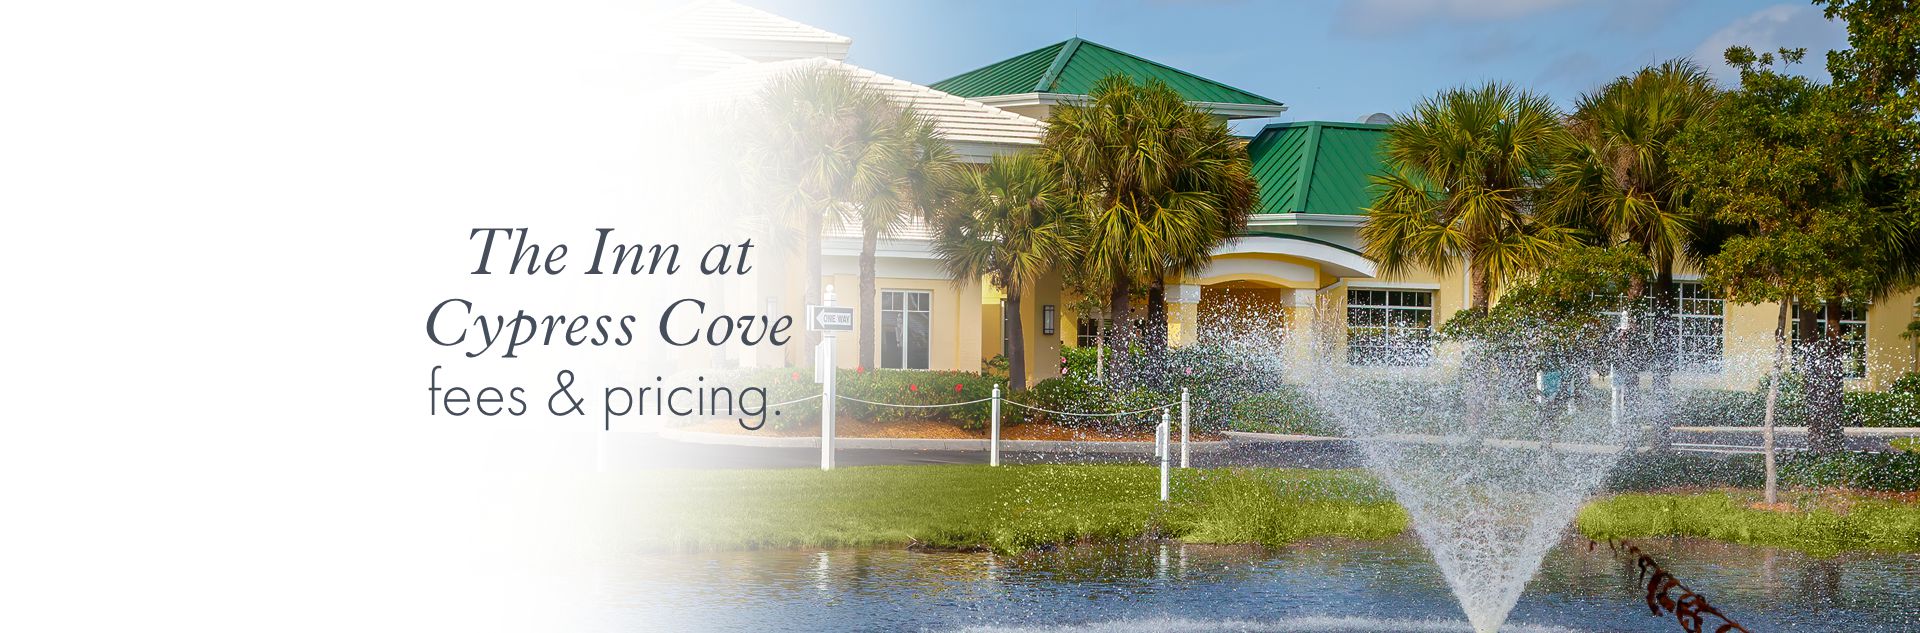 The Inn at Cypress Cove fees & pricing.